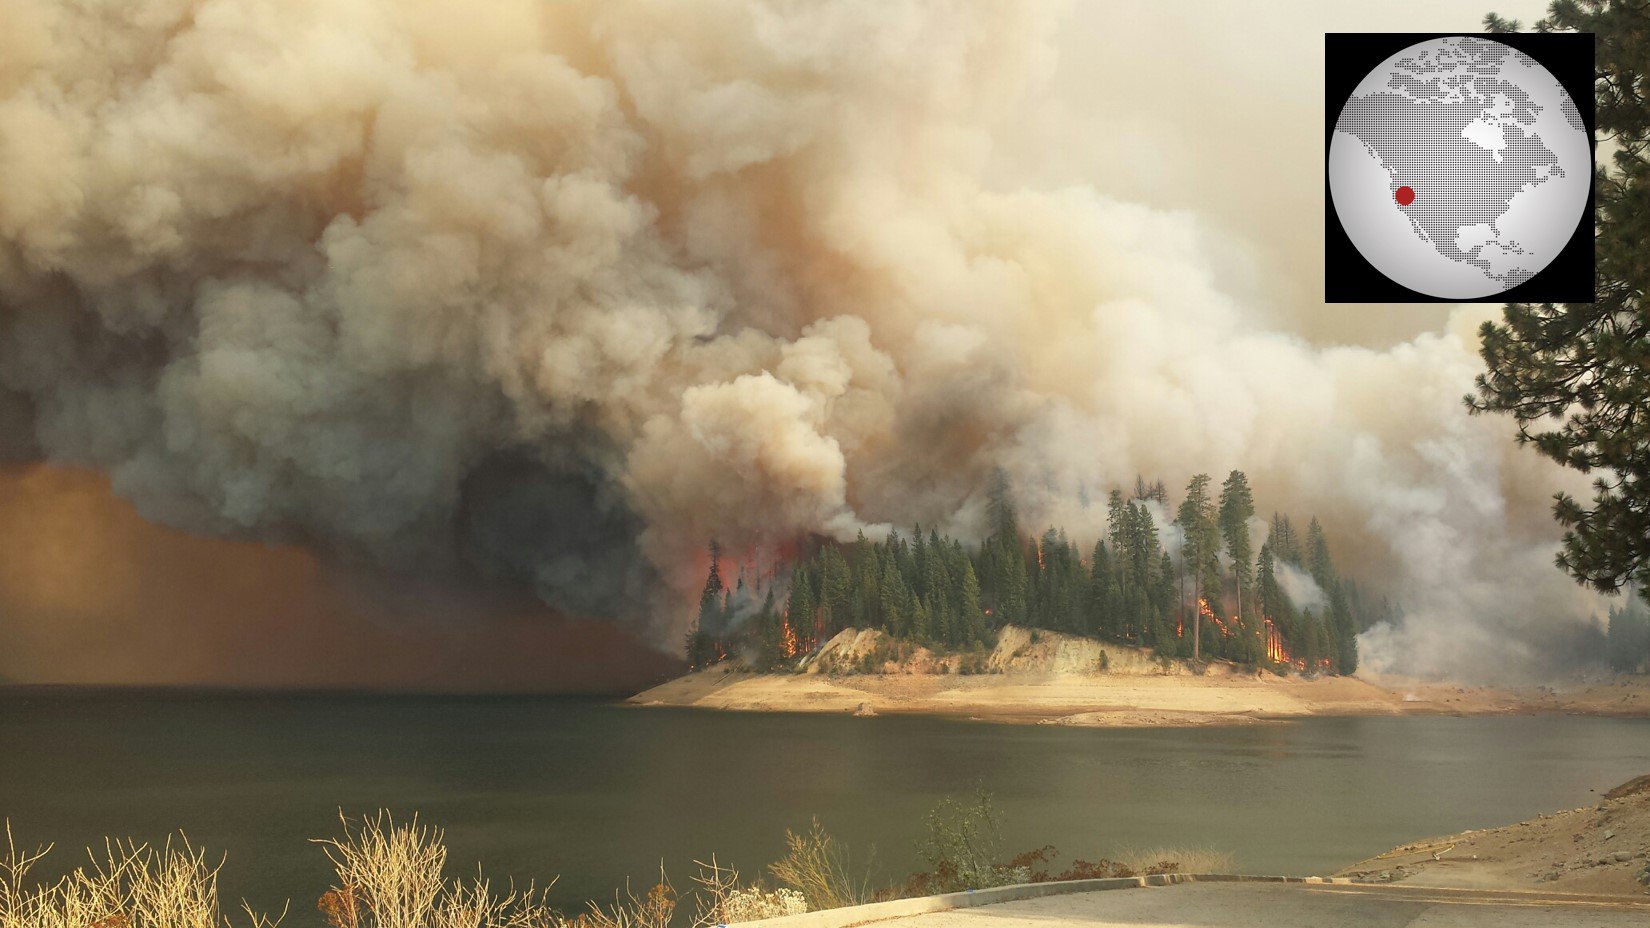 This image captures the King Fire actively burning through Stumpy Meadows Campground located on Stumpy Meadows Reservoir, CA (Photo by U.S. Forest Service Region 5).